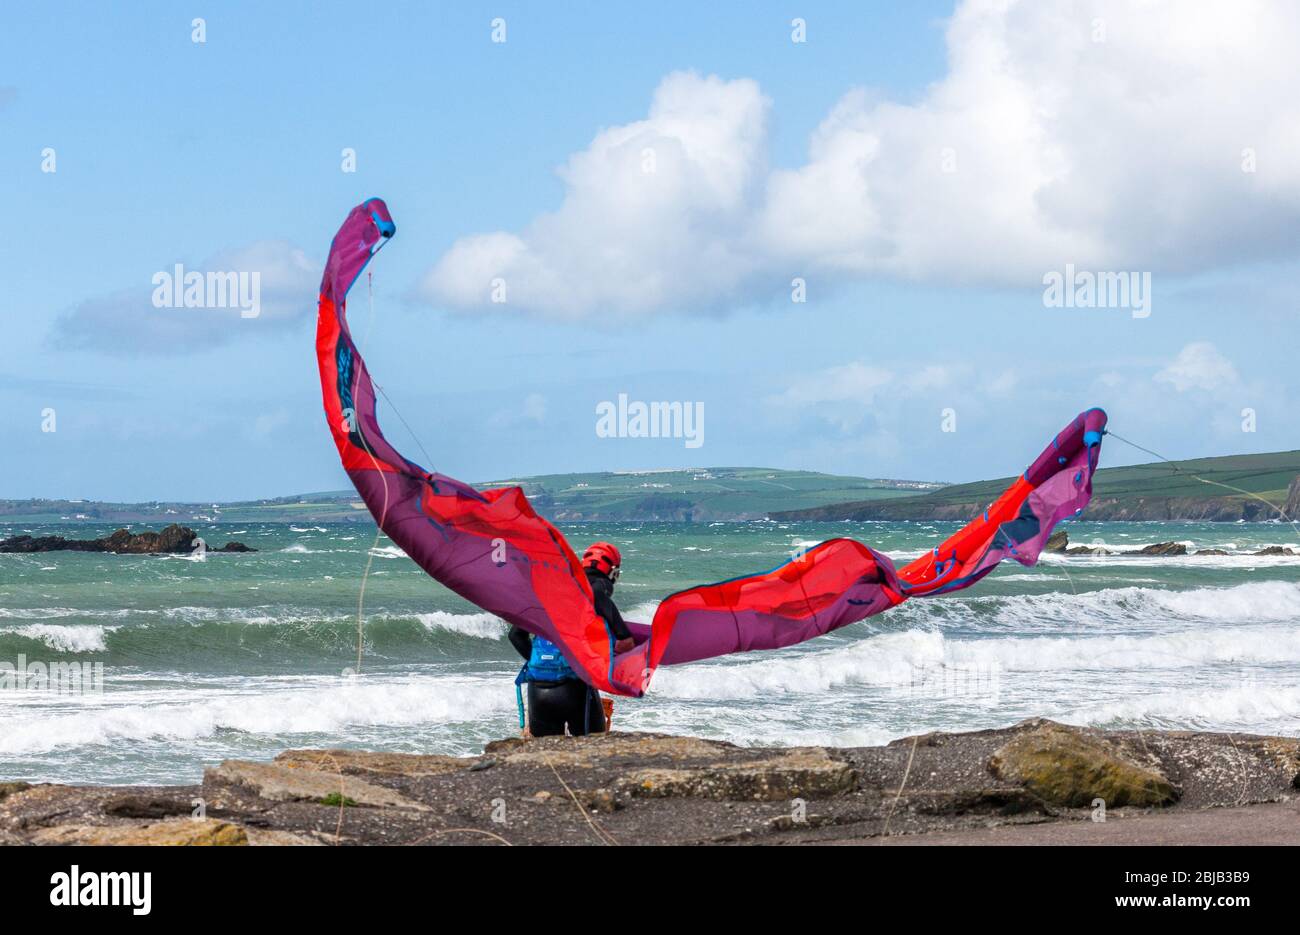 Garrettstown, Cork, Ireland. 29th April, 2020. A local man struggles to control his kite in high wind, as he prepares for a morning of surfing at Garrettstown beach in Co. Cork, Ireland. - Credit; David Creedon / Alamy Live News Stock Photo